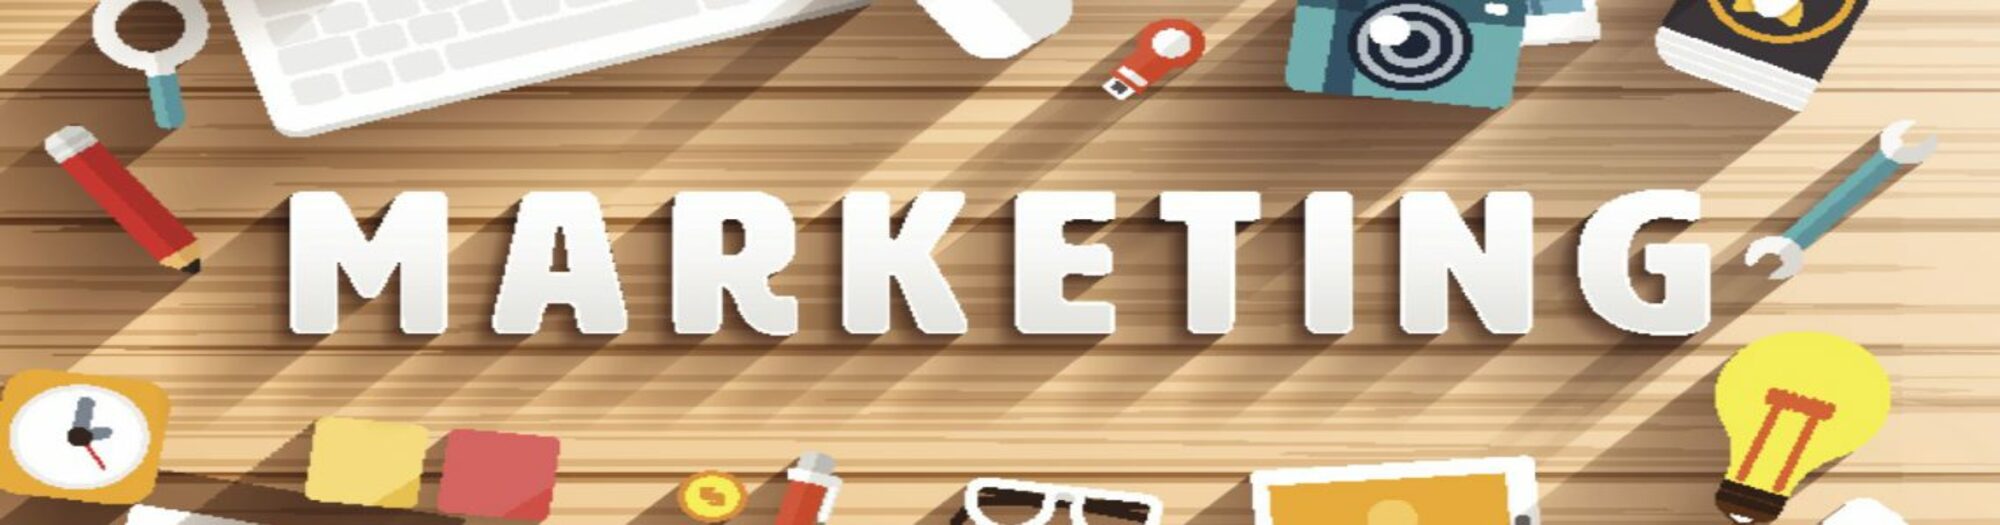 The Role of Marketing: How it Affects Business and How to Market the Right  Way - Digital Marketing Blog